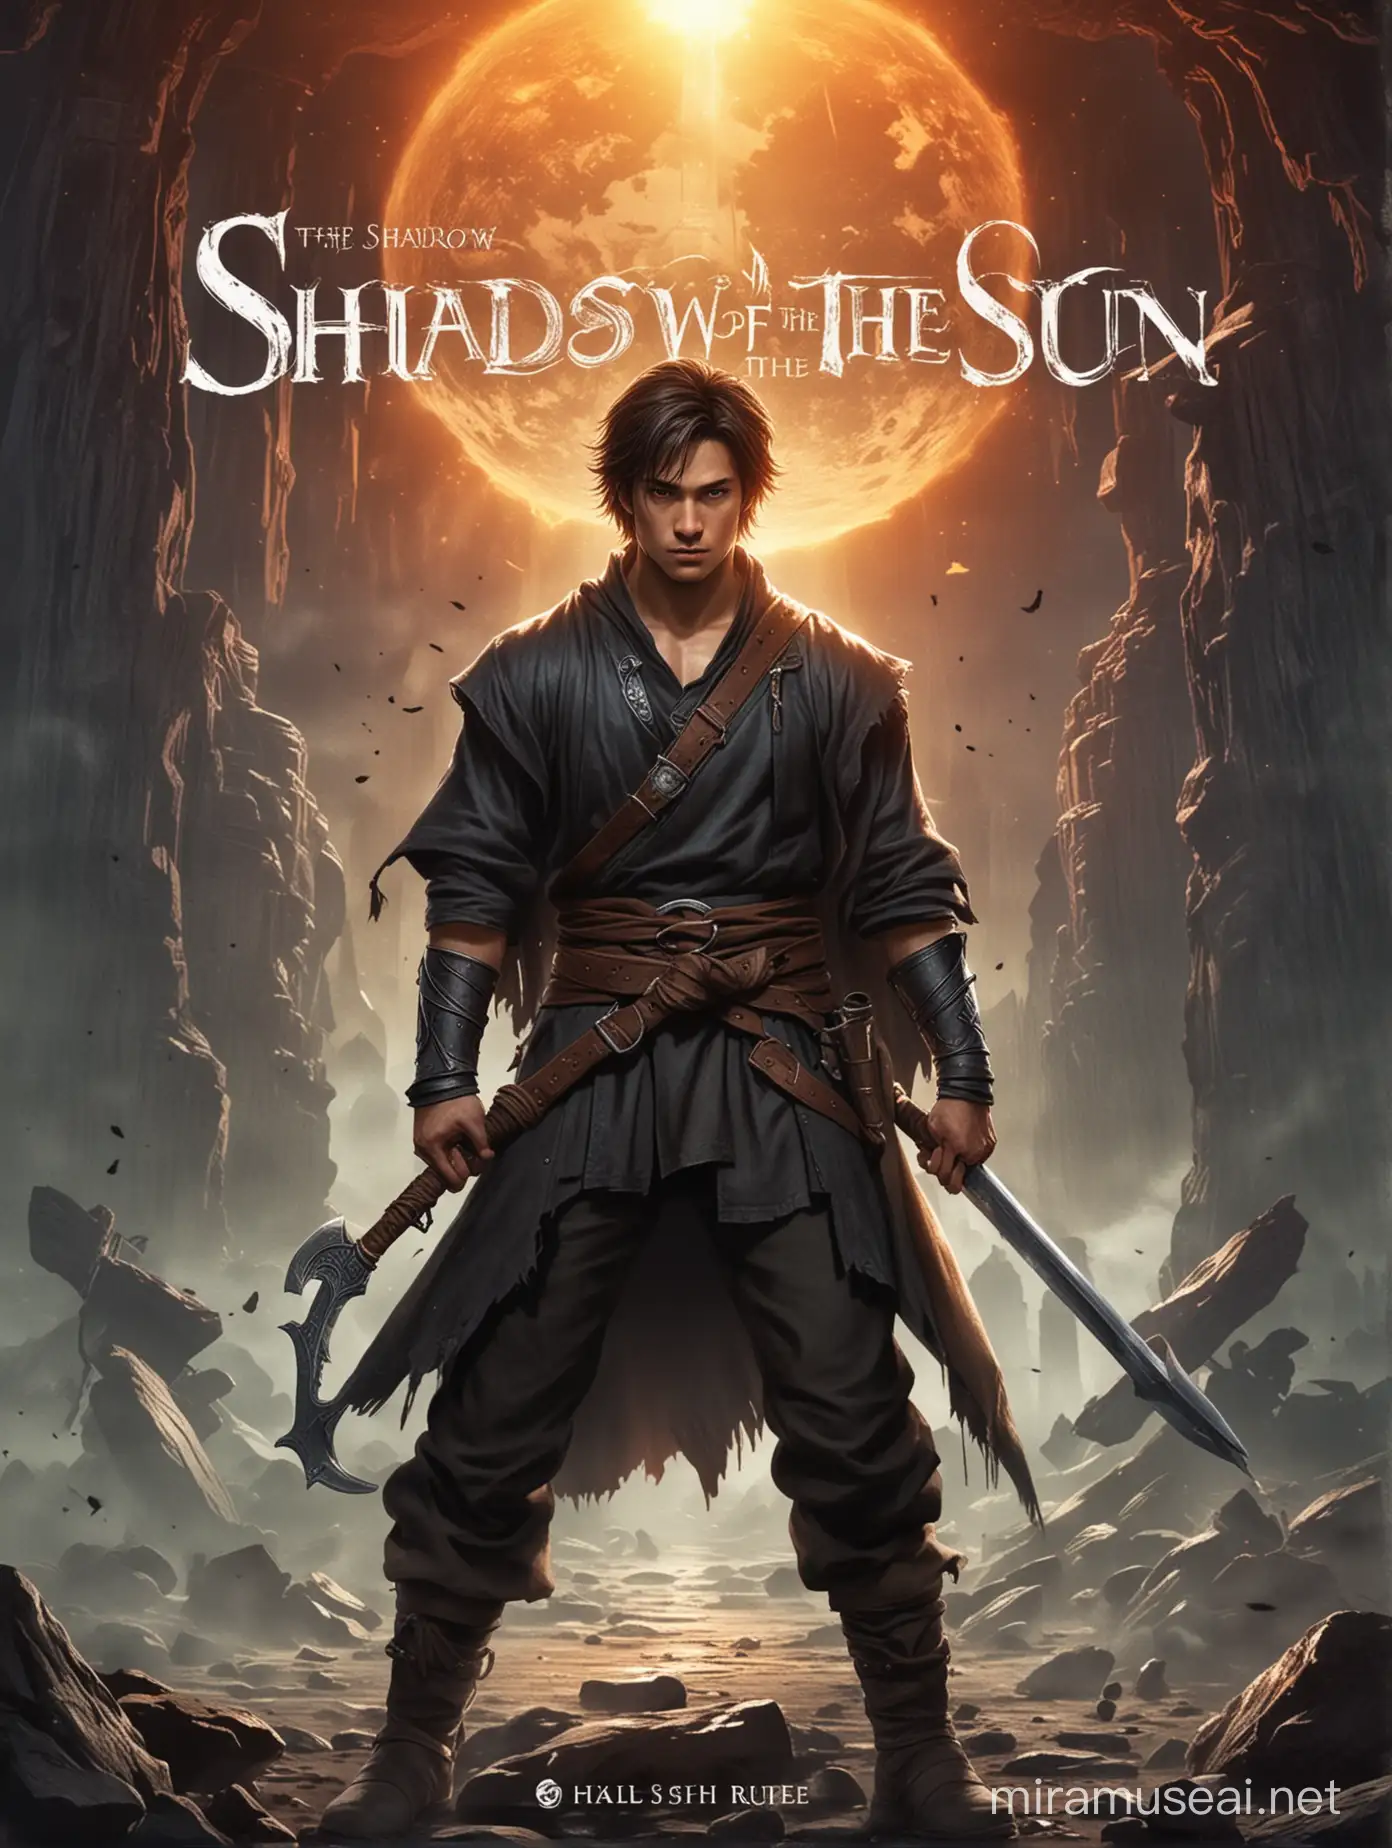 REALISTIC BOOK COVER DESIGN
Title:"The Shadow of the Sun"
Genre: Fantasy
Theme: Secrets, prophecy, struggle between light and dark
Heading: He was born to change the world... or destroy it.
Summary: Kai, a young blacksmith's apprentice marked with an ancient rune, discovers he's at the center of a prophecy foretelling either salvation or ruin. As dark forces stir, Kai must decipher his destiny and choose his path.